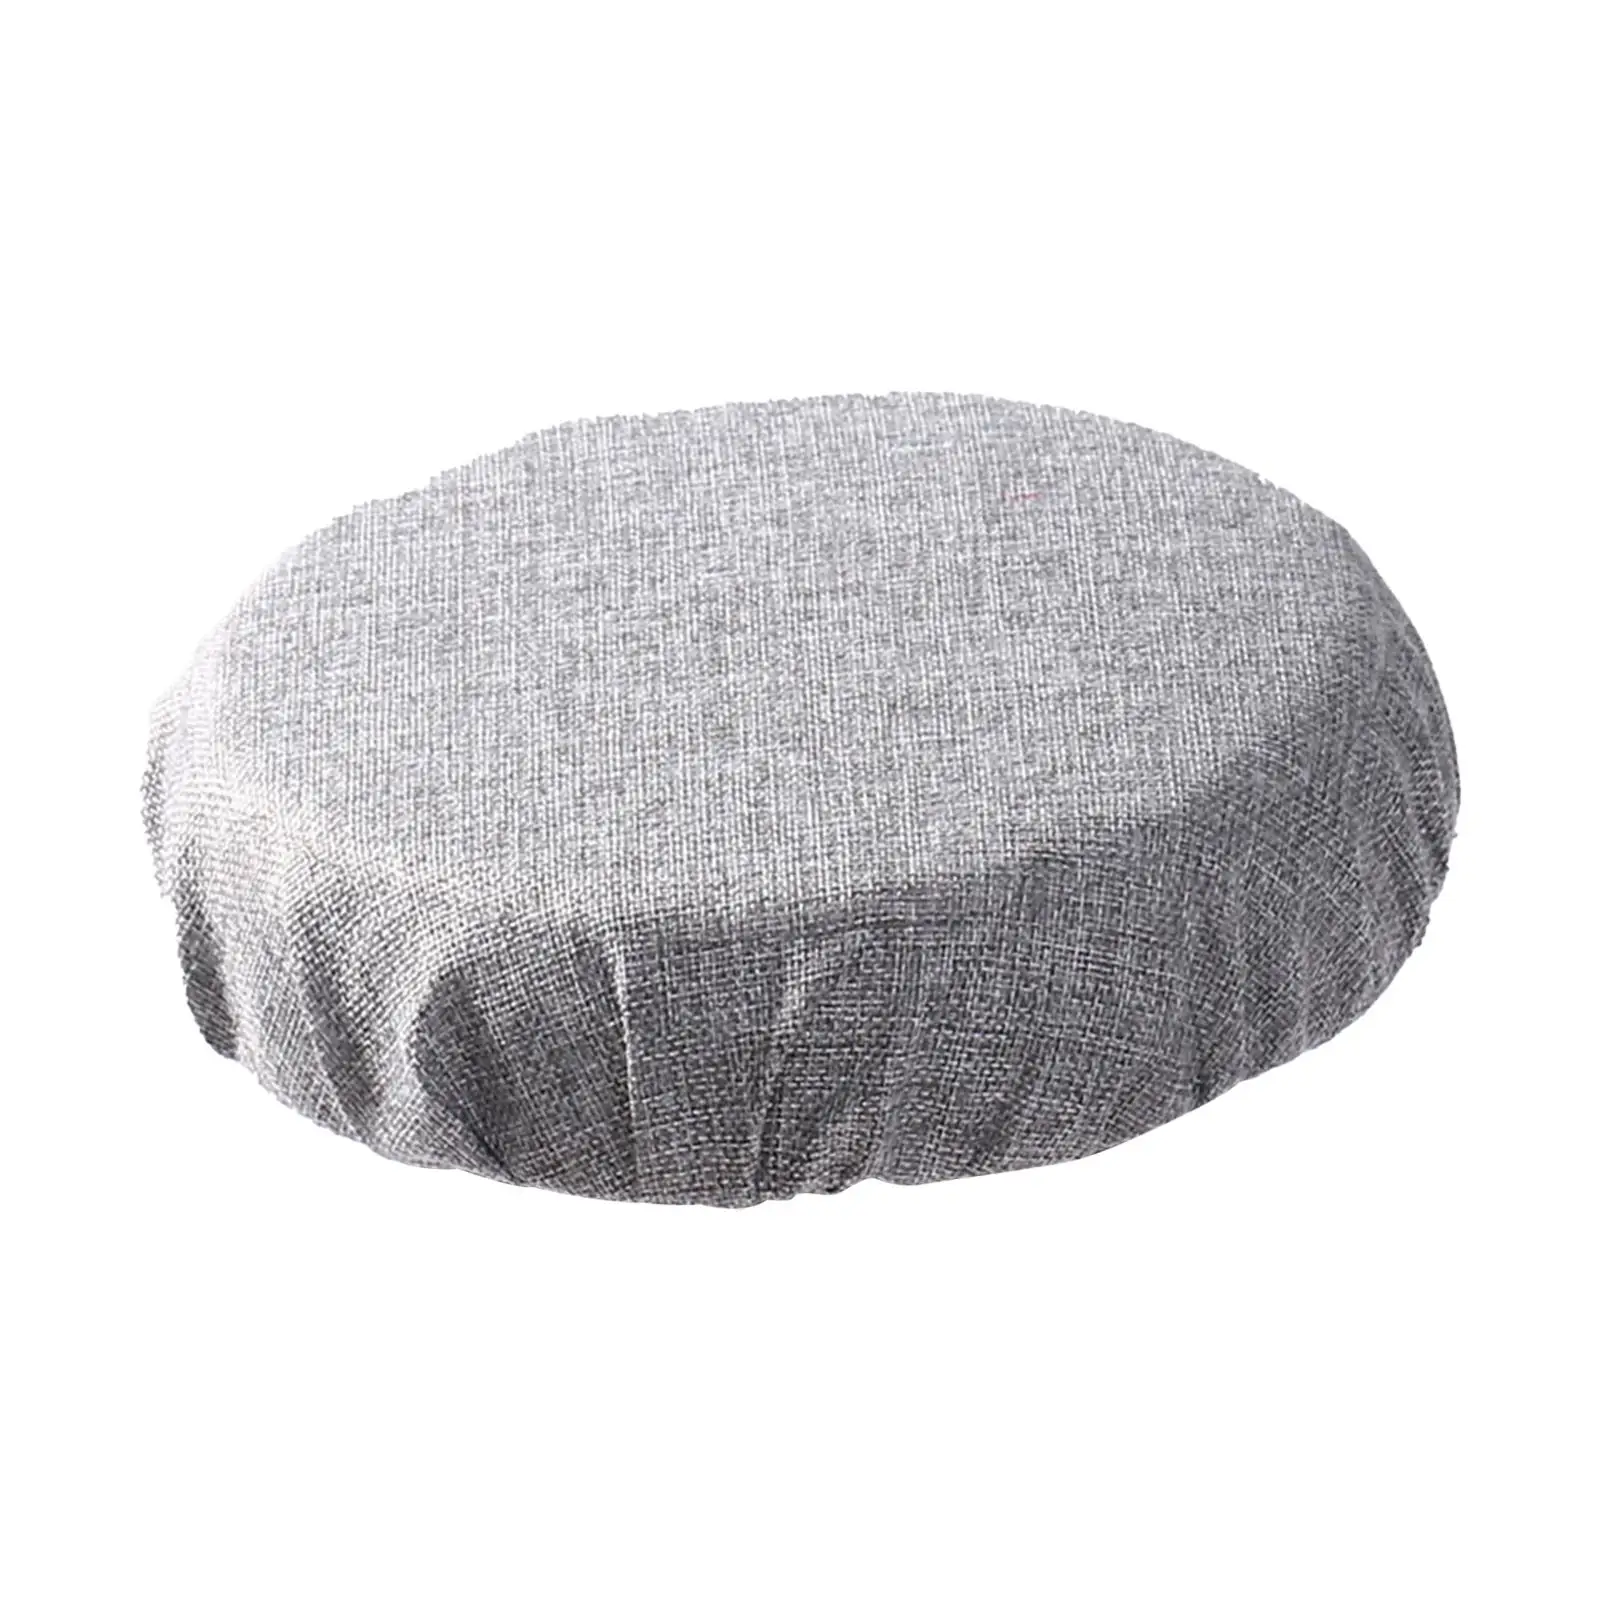 Seat Cushion for Chair Living Room Office Stadium Indoor Outdoor Collapsible Stool Cushion for Travel BBQ Party Lawn Backpacking